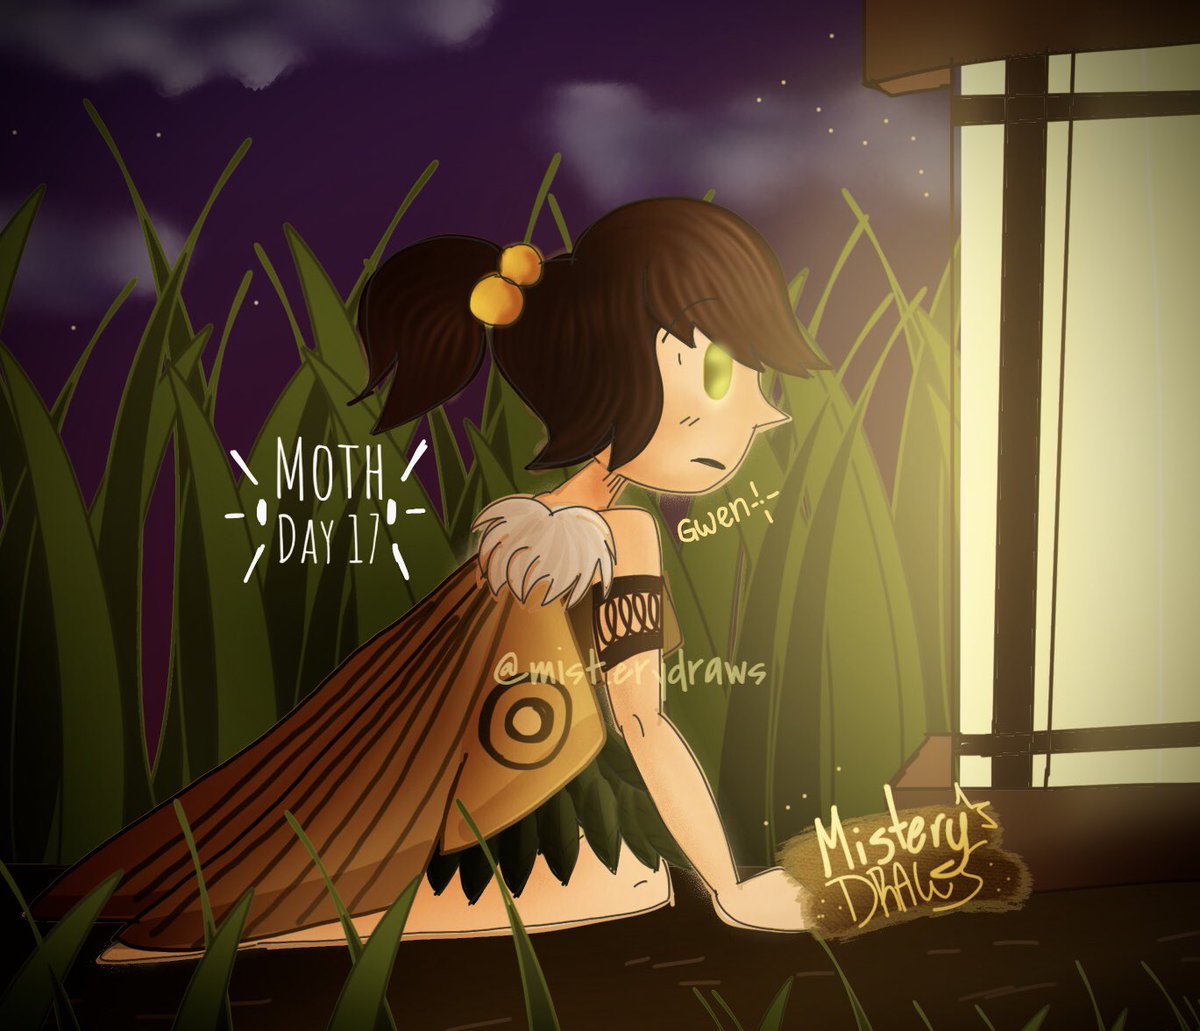 ••DAY 17••

A little late but the Moths only appears in the night 🌙~

#drawing #draw #art #drawoftheday #digitalillustration #owncharacters #myartstyle #digitaldrawing #digitalartist #moth #mothfairy #magiccreatures #mythicalcreatures #inktober #fall #night #nightdrawing